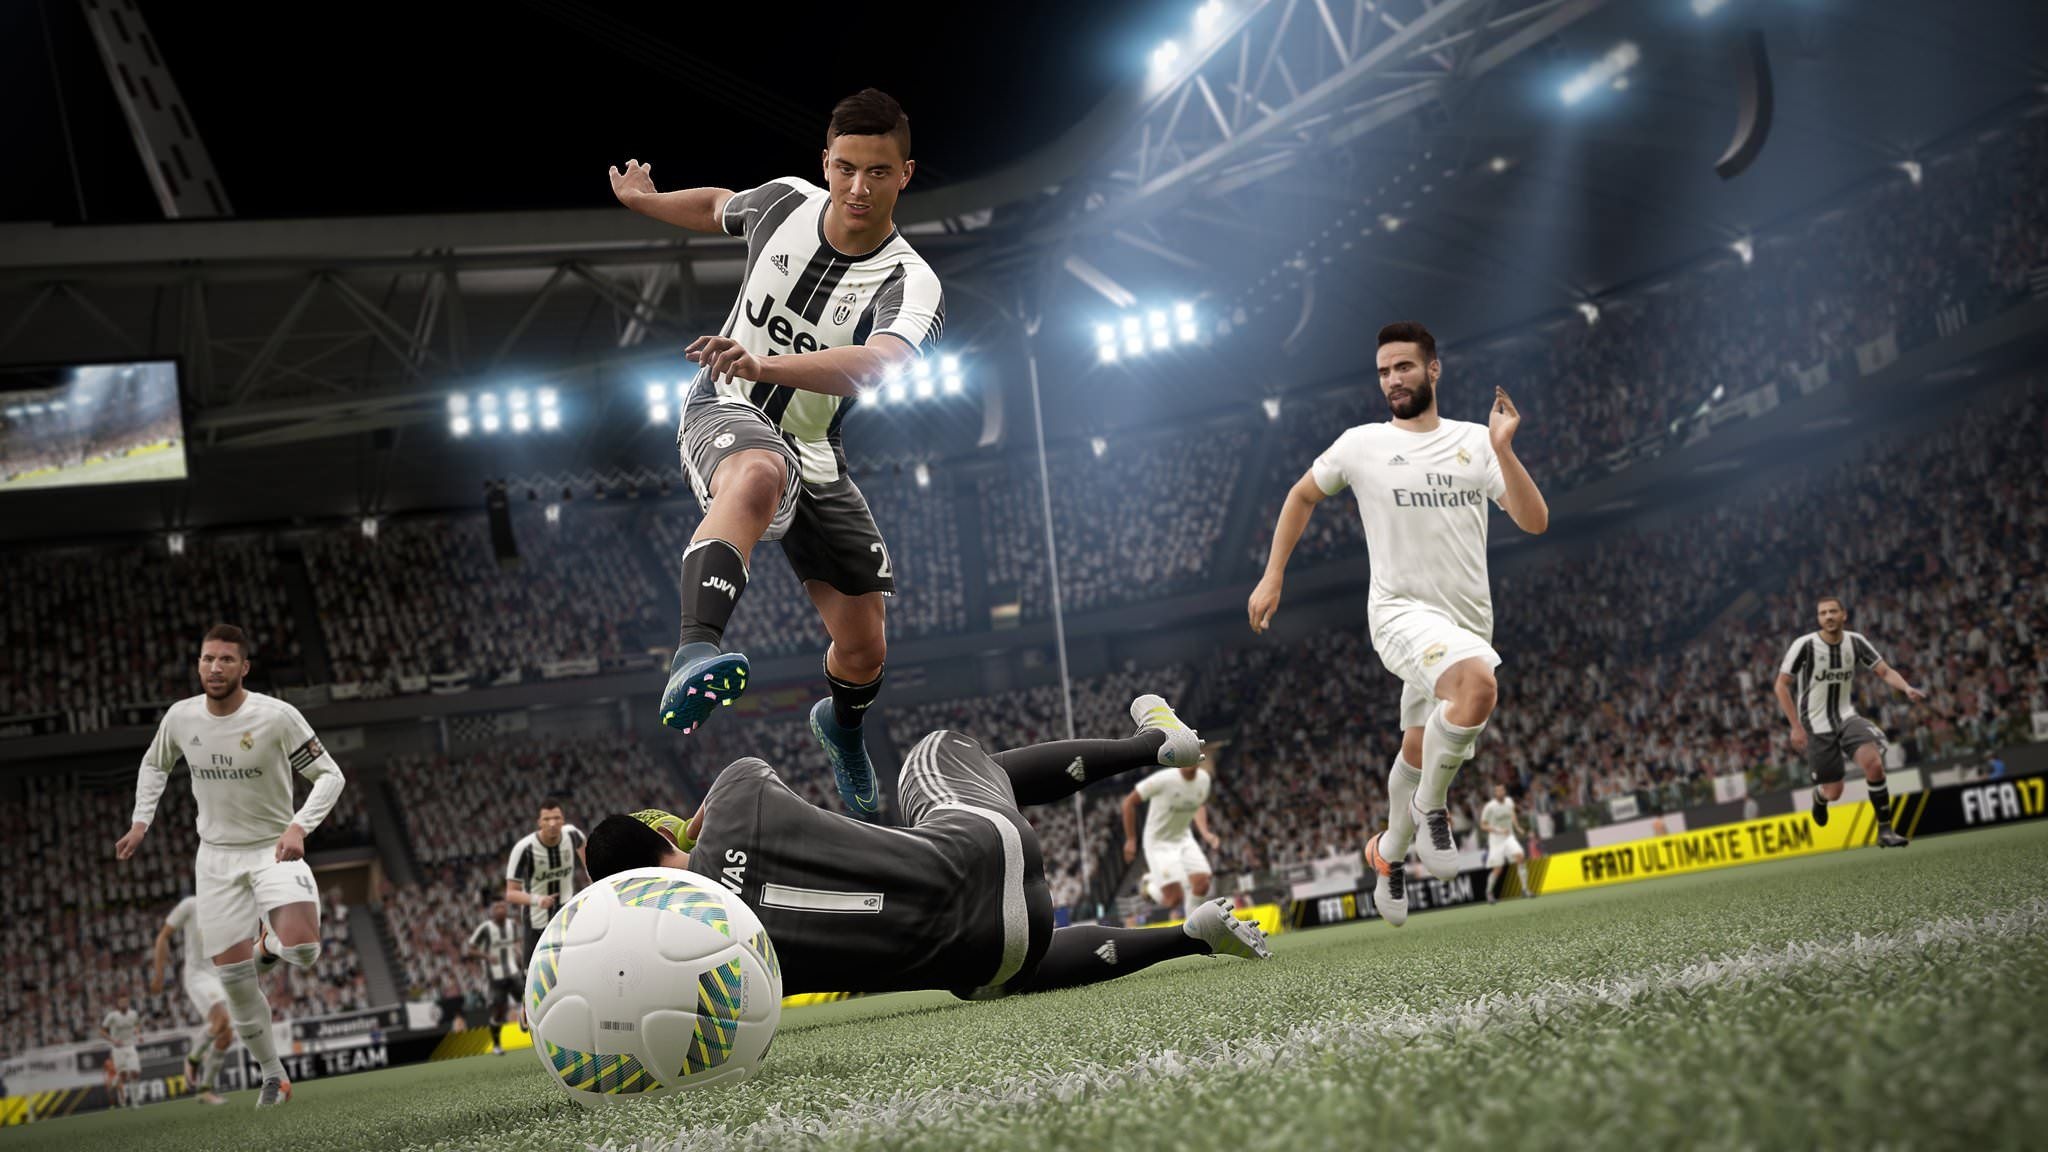 FIFA Soccer (Game): 2017 football simulator, New single-player story campaign mode, “The Journey”. 2050x1160 HD Wallpaper.